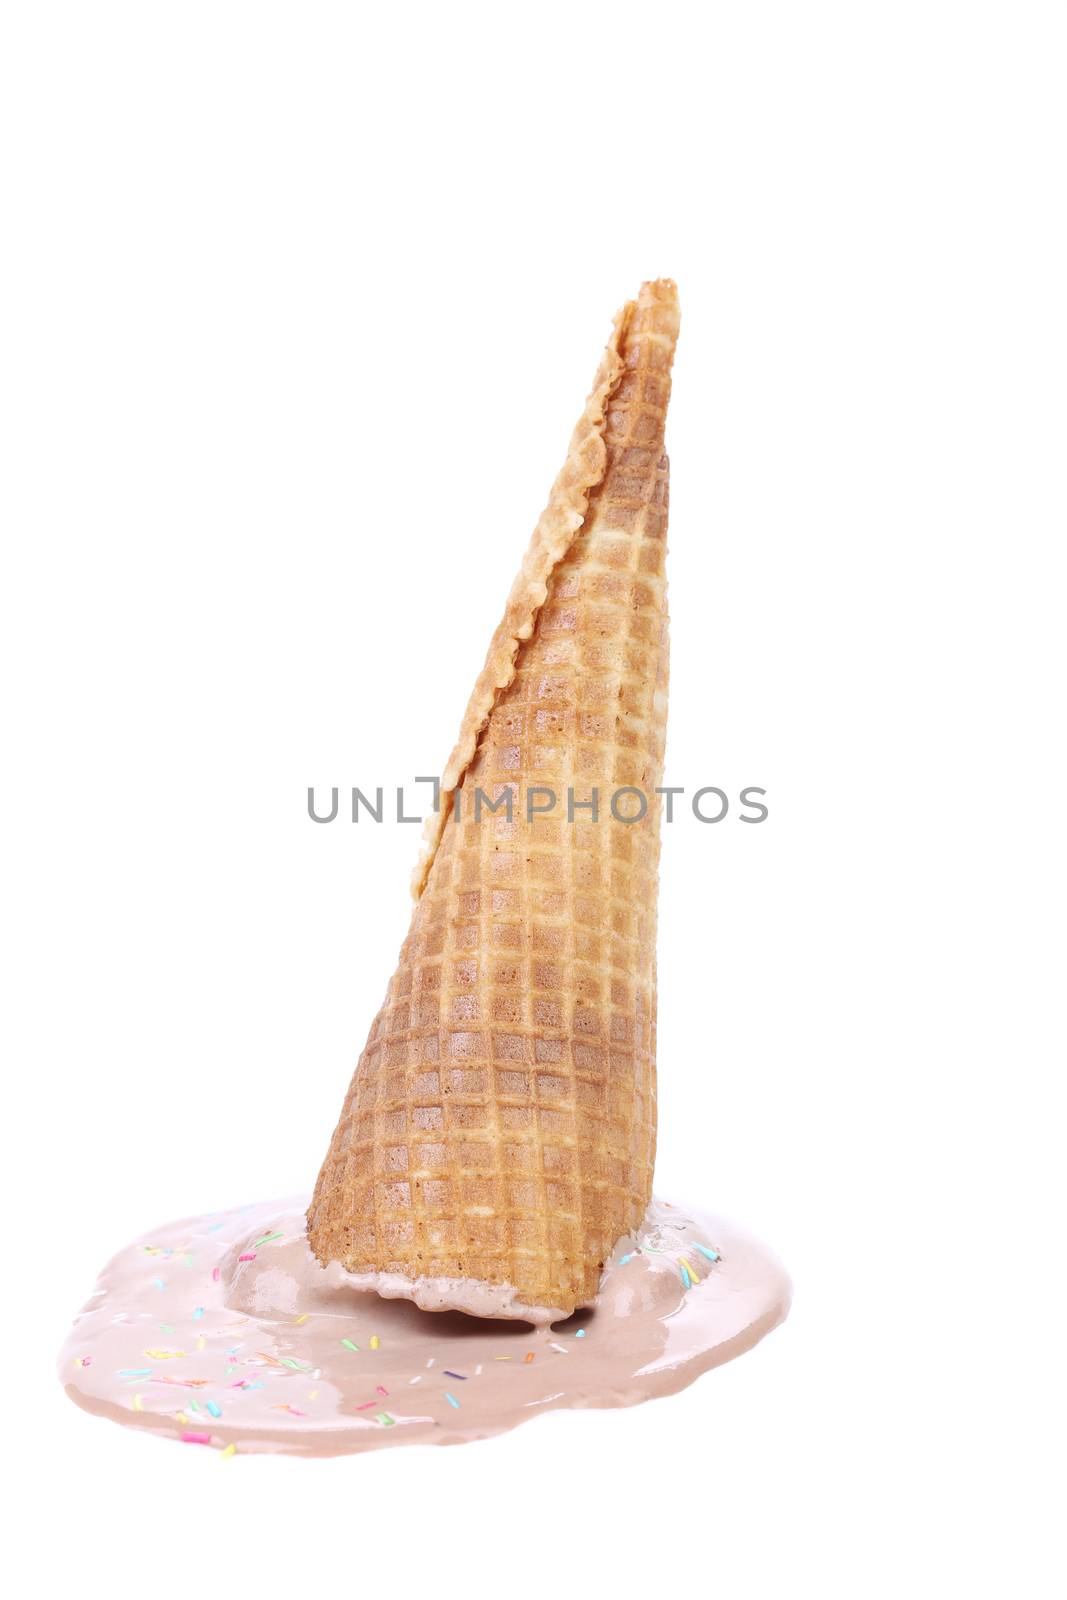 Chocolate ice cream cone fallen. Isolated on a white background.